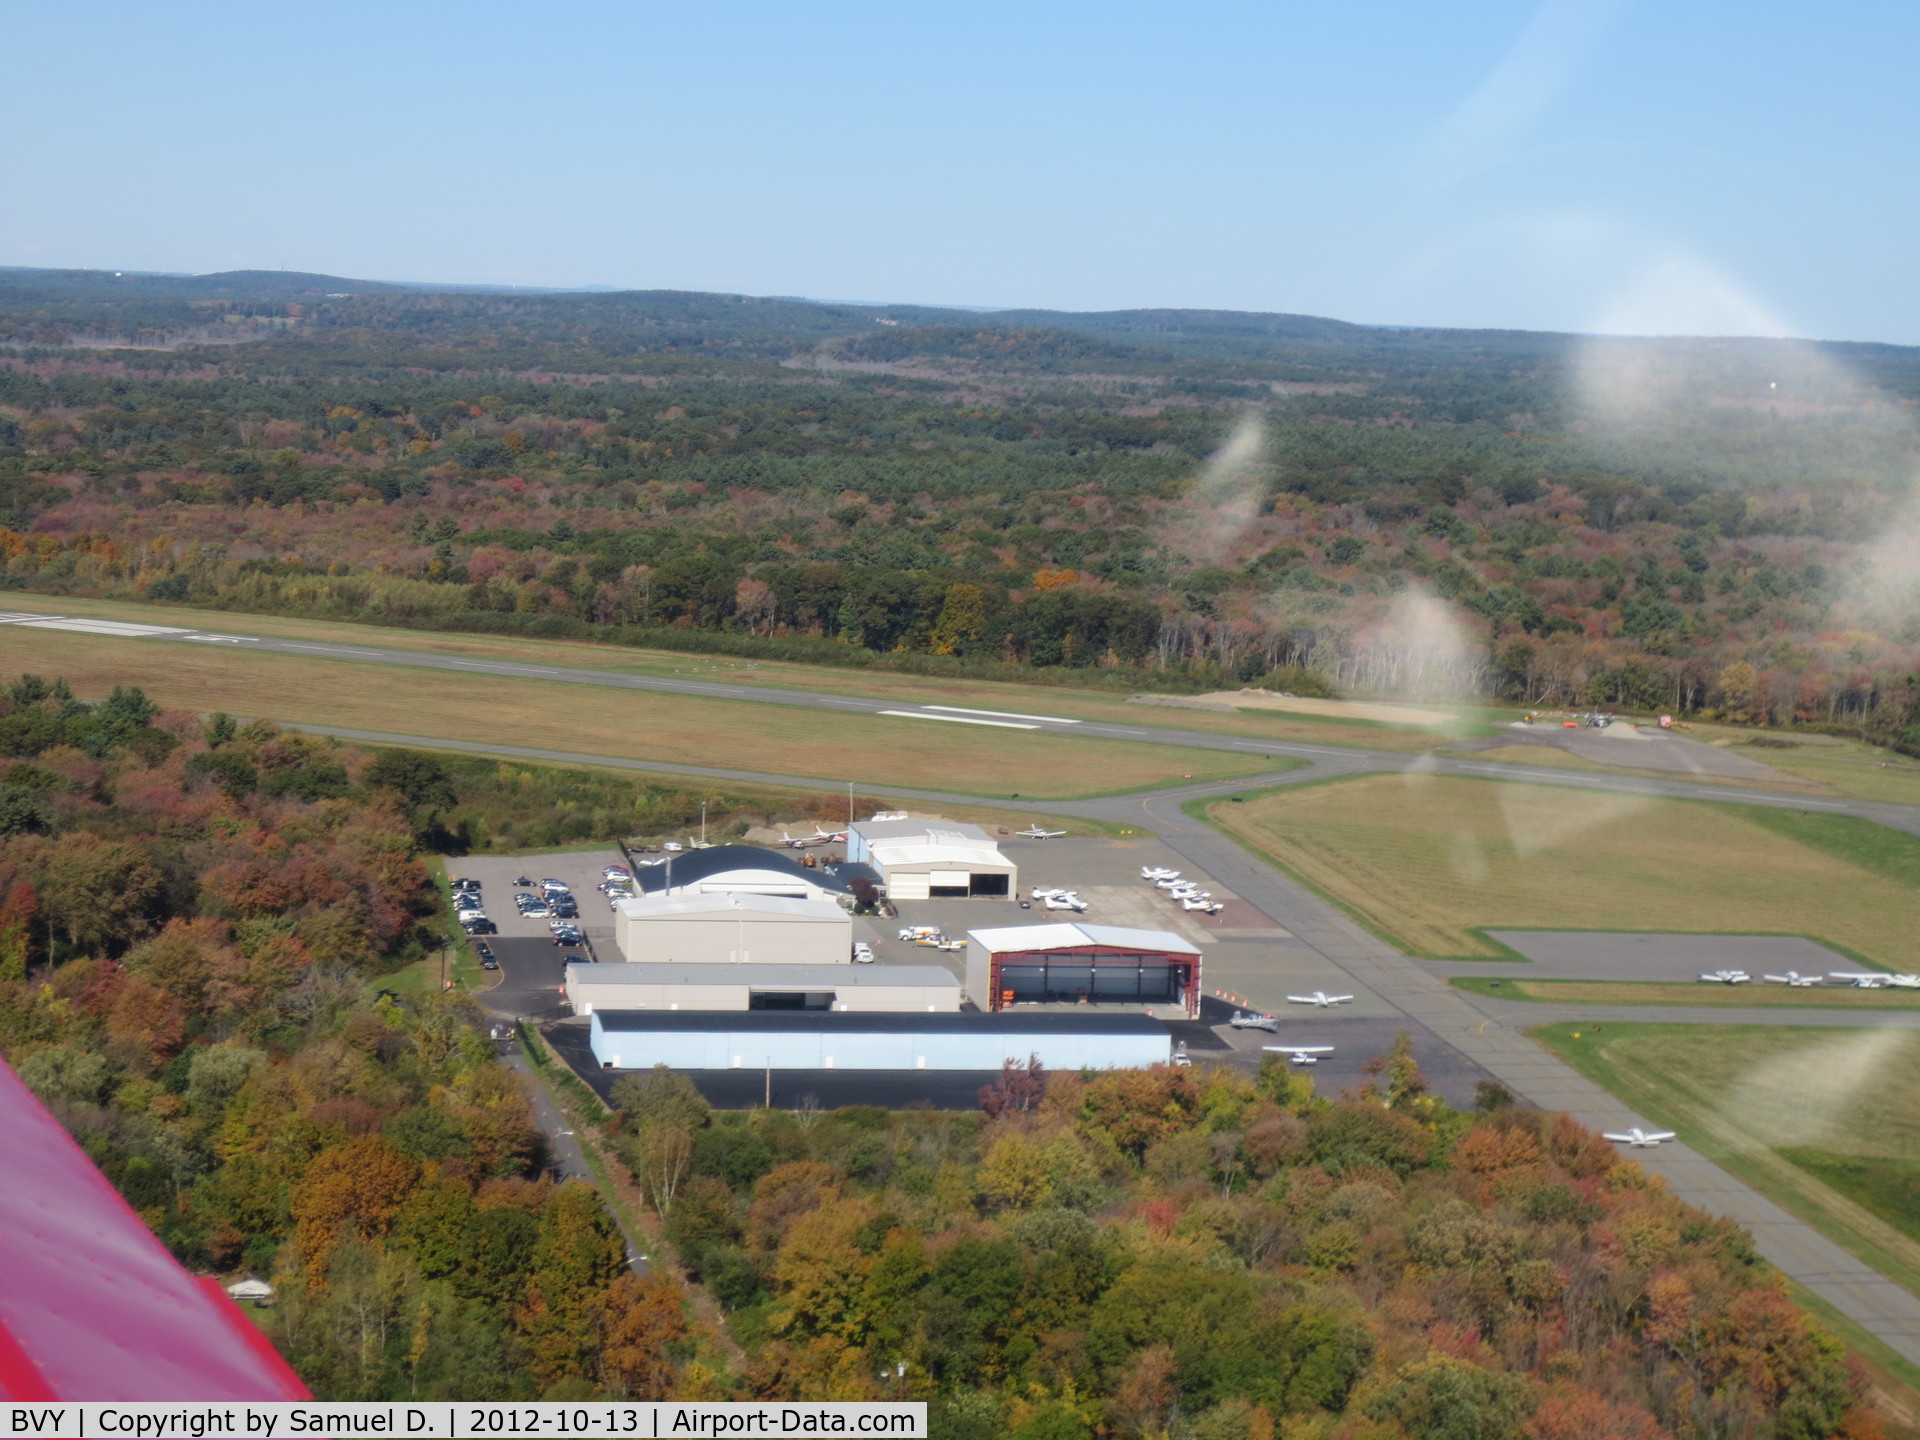 Beverly Municipal Airport (BVY) - On the right turn out from runway 27 en-route to Portland, Maine.